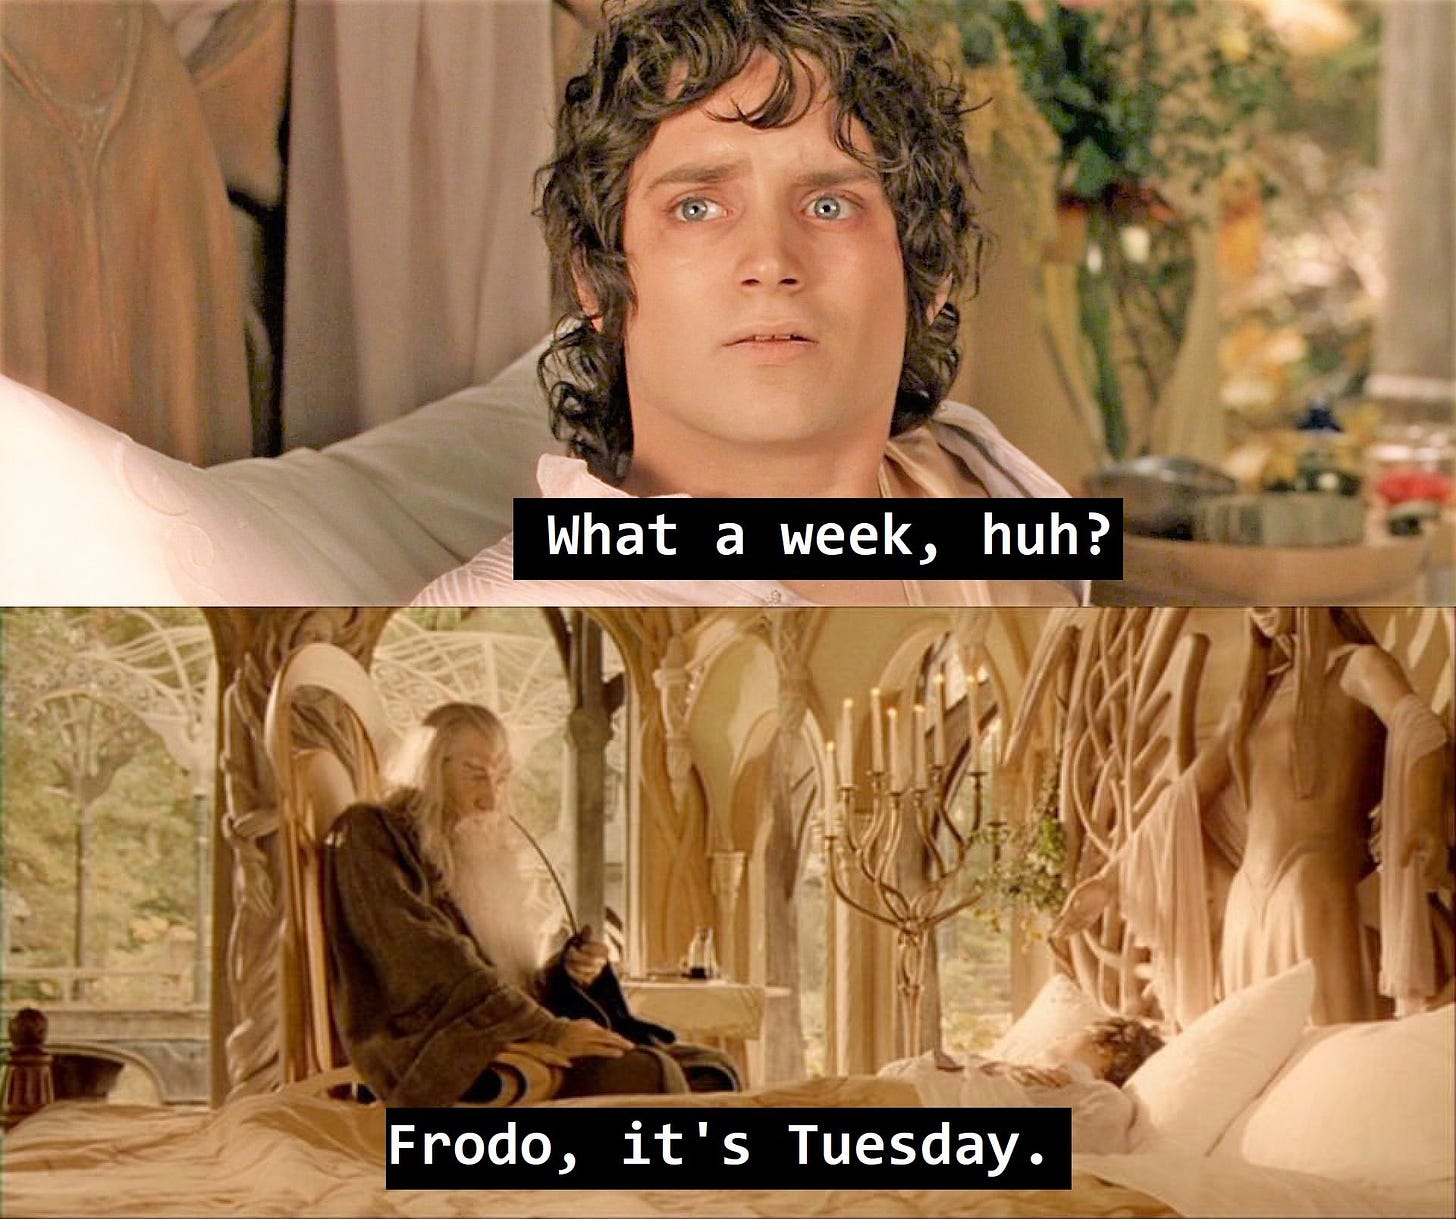 Screencaps from Lord of the Rings, with Frodo waking up in Rivendell in the first frame, Gandalf next to his bed smoking a pipe in the second. The first screencap reads 'what a week, huh?' and the second reads 'Frodo, it's Tuesday.'